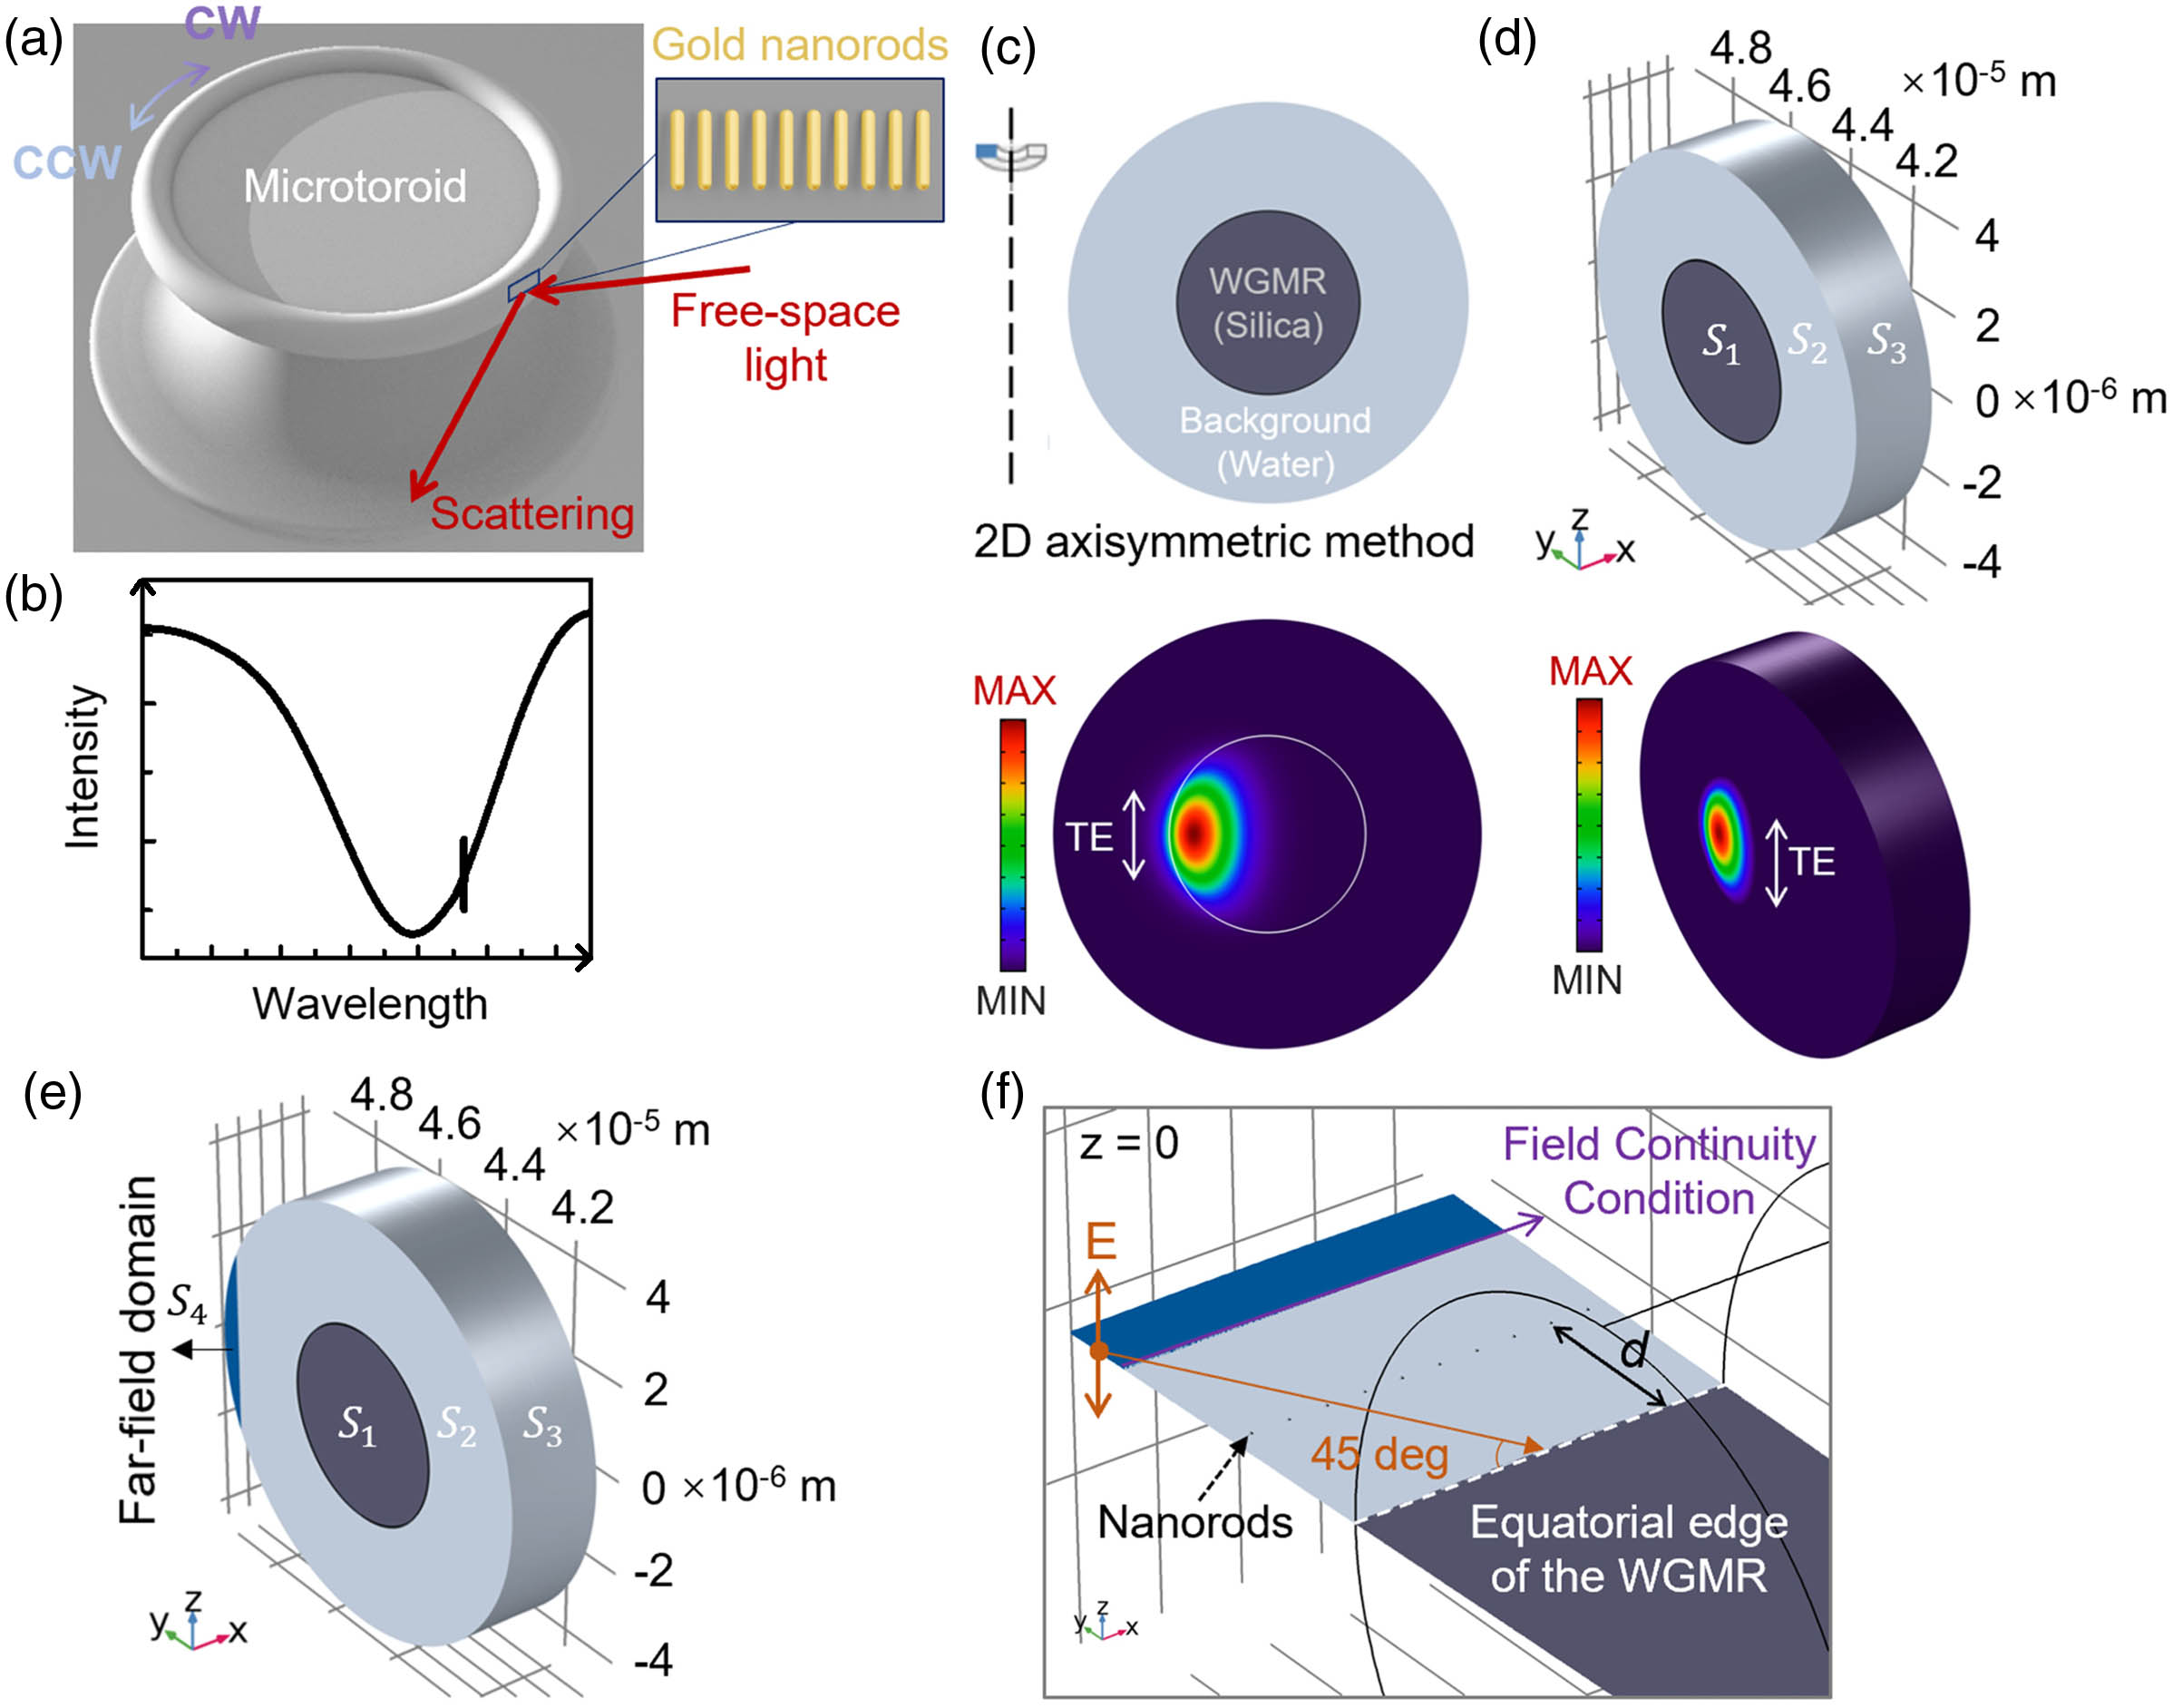 Free-space coupling to a WGM microtoroid optical resonator via a phased array of gold nanorods. (a) Schematic view. (b) Collection of far-field scattering from the grating shows the Fano resonance corresponding to the interference between the grating and WGM resonances. (c) Established 2D axisymmetric simulations identify a resonance of the bare WGM at λ2≈633 nm, corresponding to an azimuthal mode number m=660. (d) The FloWBEM simulation of the same bare toroid as in panel (c). Surfaces S1 and S2 are simulated with Floquet boundary conditions, and S3 is simulated with scattering boundary conditions. (e) For simulating the driven system, a far-field domain (S4) is added at the circumference, replacing the Floquet and scattering boundary conditions for that region. (f) Nanorods are placed in the equatorial plane, between the light source, which is incident at 45°, and the silica toroid. A field continuity condition is applied between the light source and the domain surrounding the toroid.